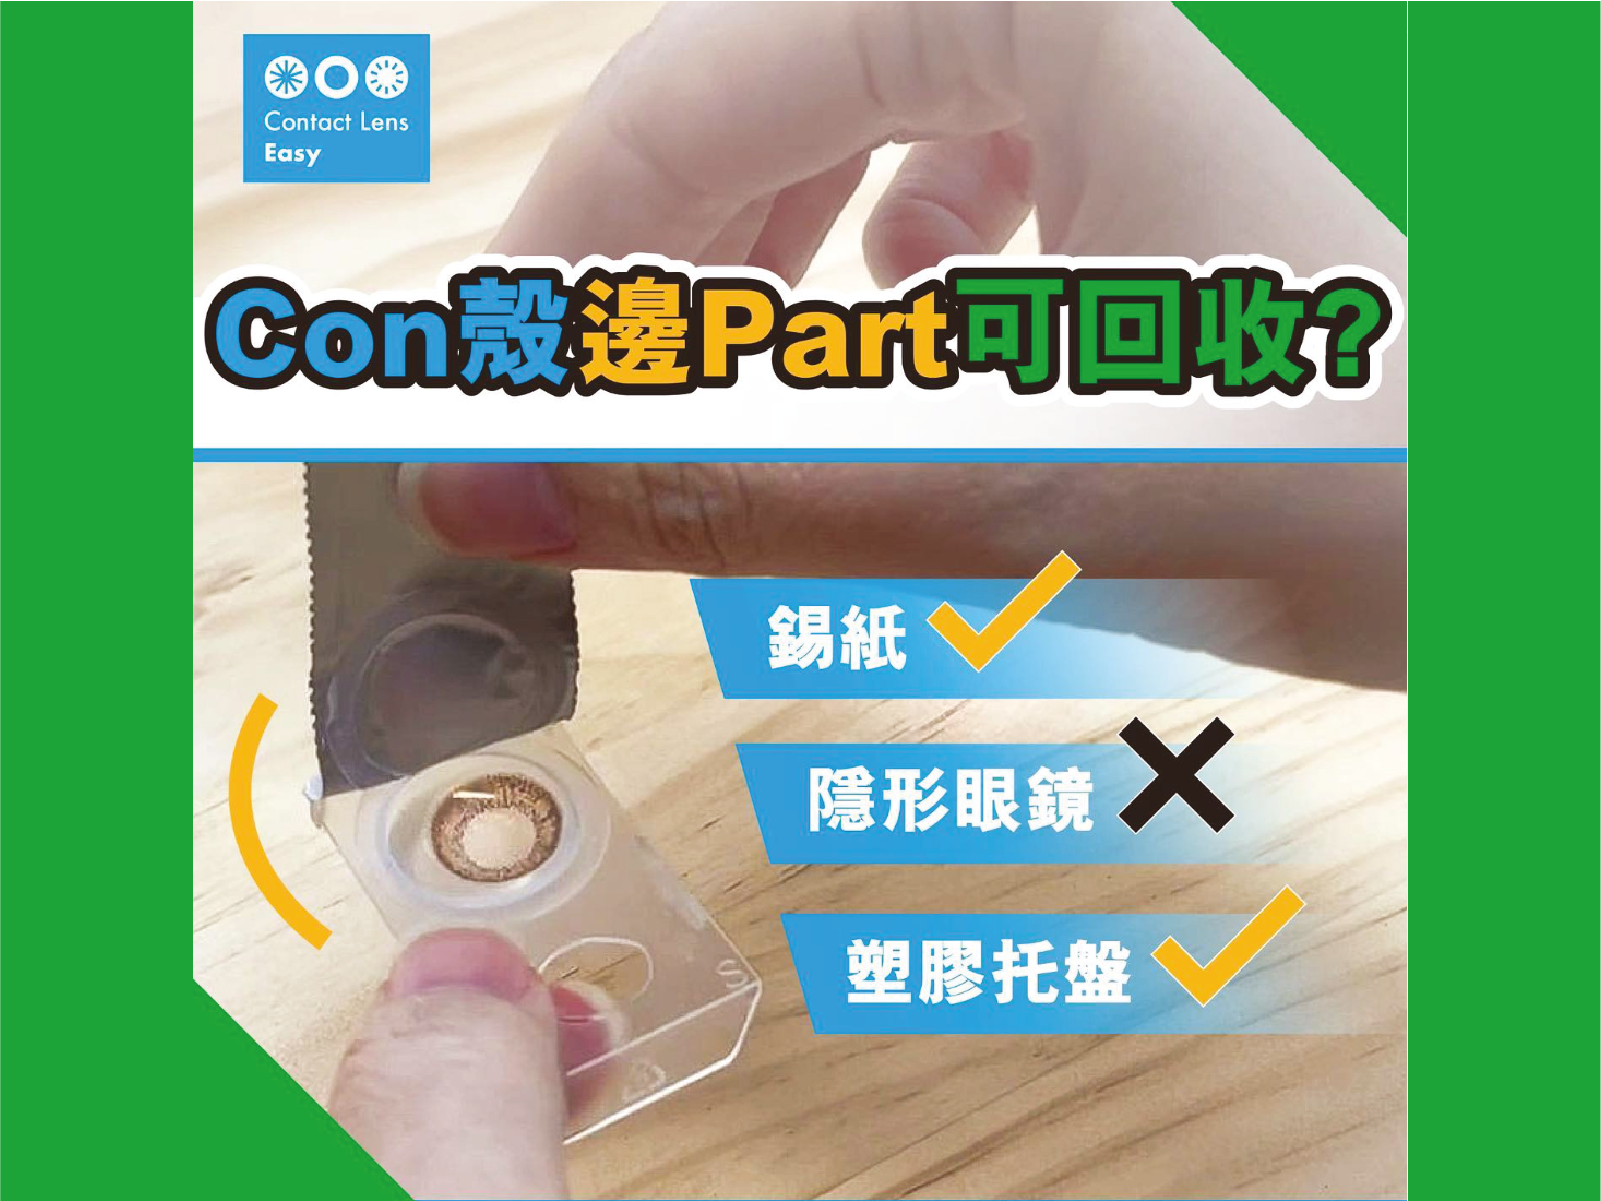 Contact Lens Easy is providing recycling program for collecting the cases and its aluminum foil.